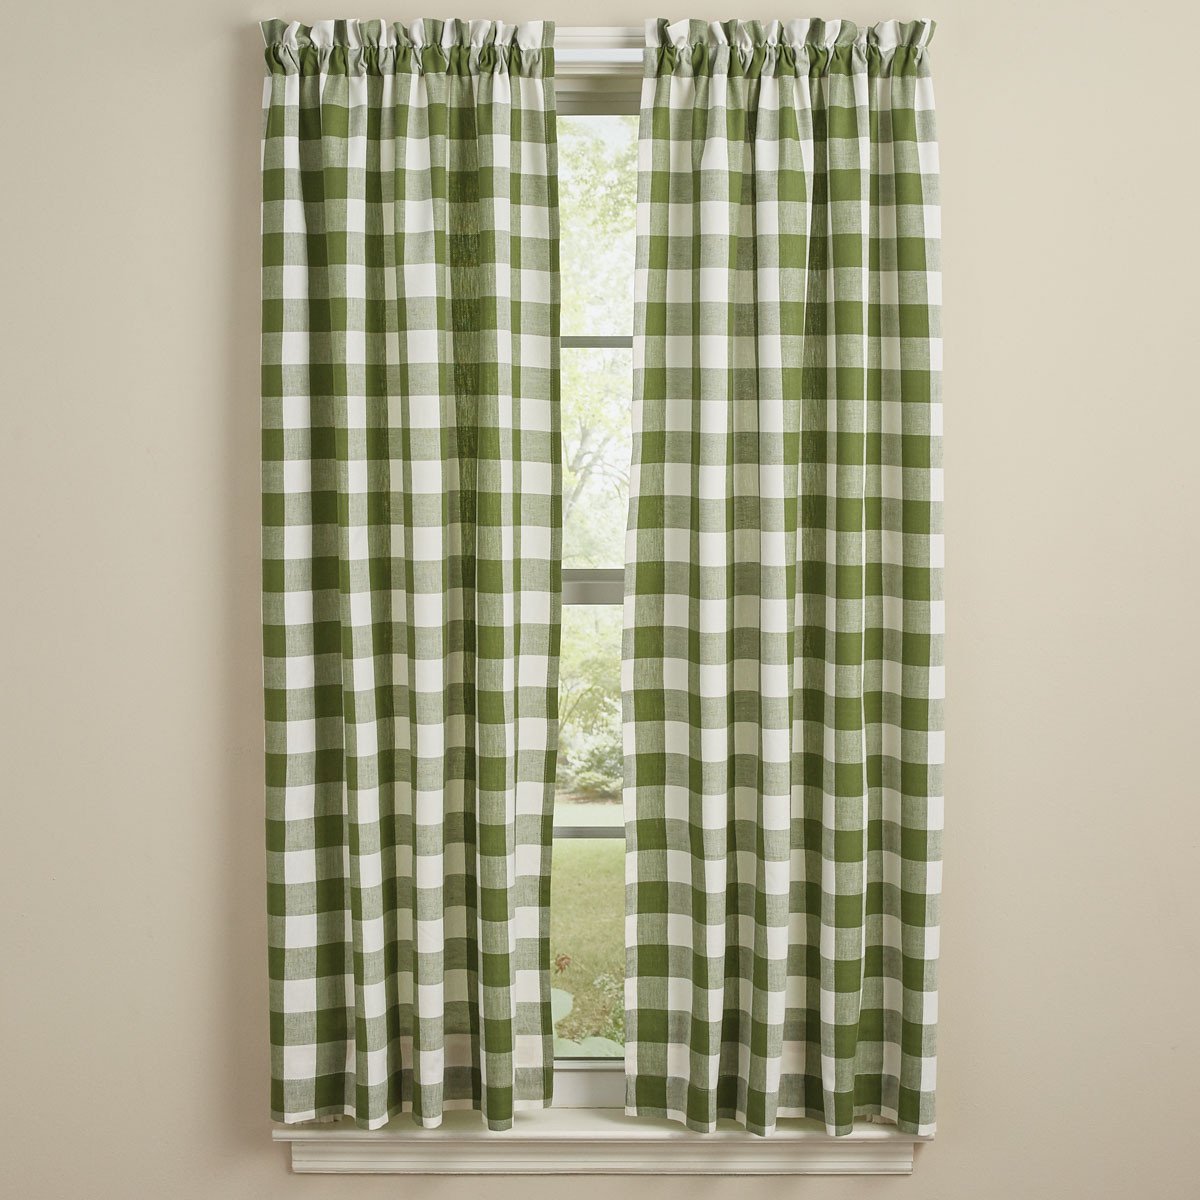 Park Designs - Wicklow Check Panels Pair  Sage and Cream - 72 x 63 Inches Unlined Farmhouse Country - Olde Church Emporium